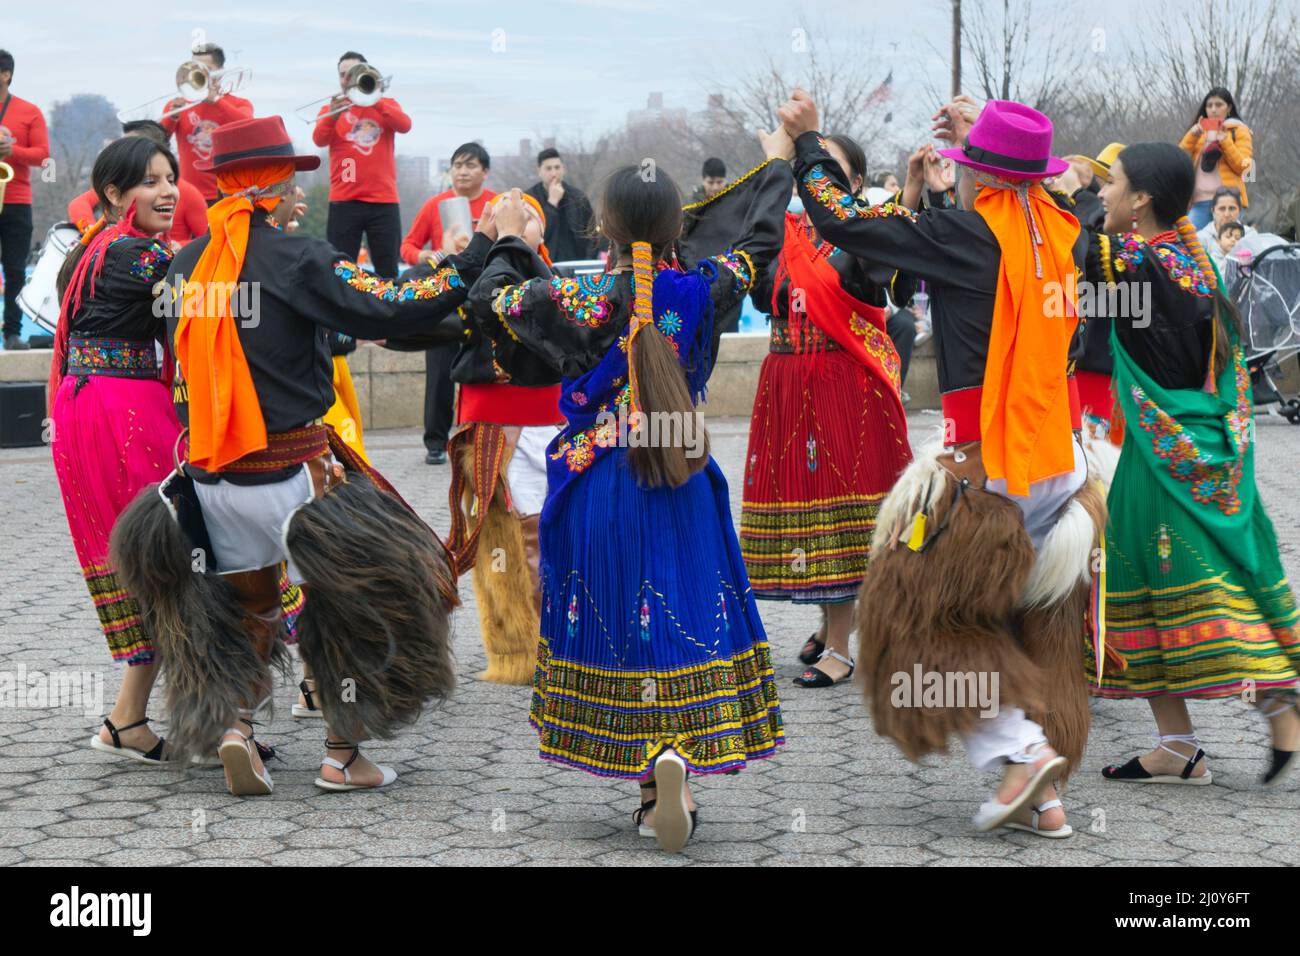 Dancers from Jatary Muzhucuna, an Ecuadorian American music & dance troupe, perform in a park in Queens, New York City. Stock Photo